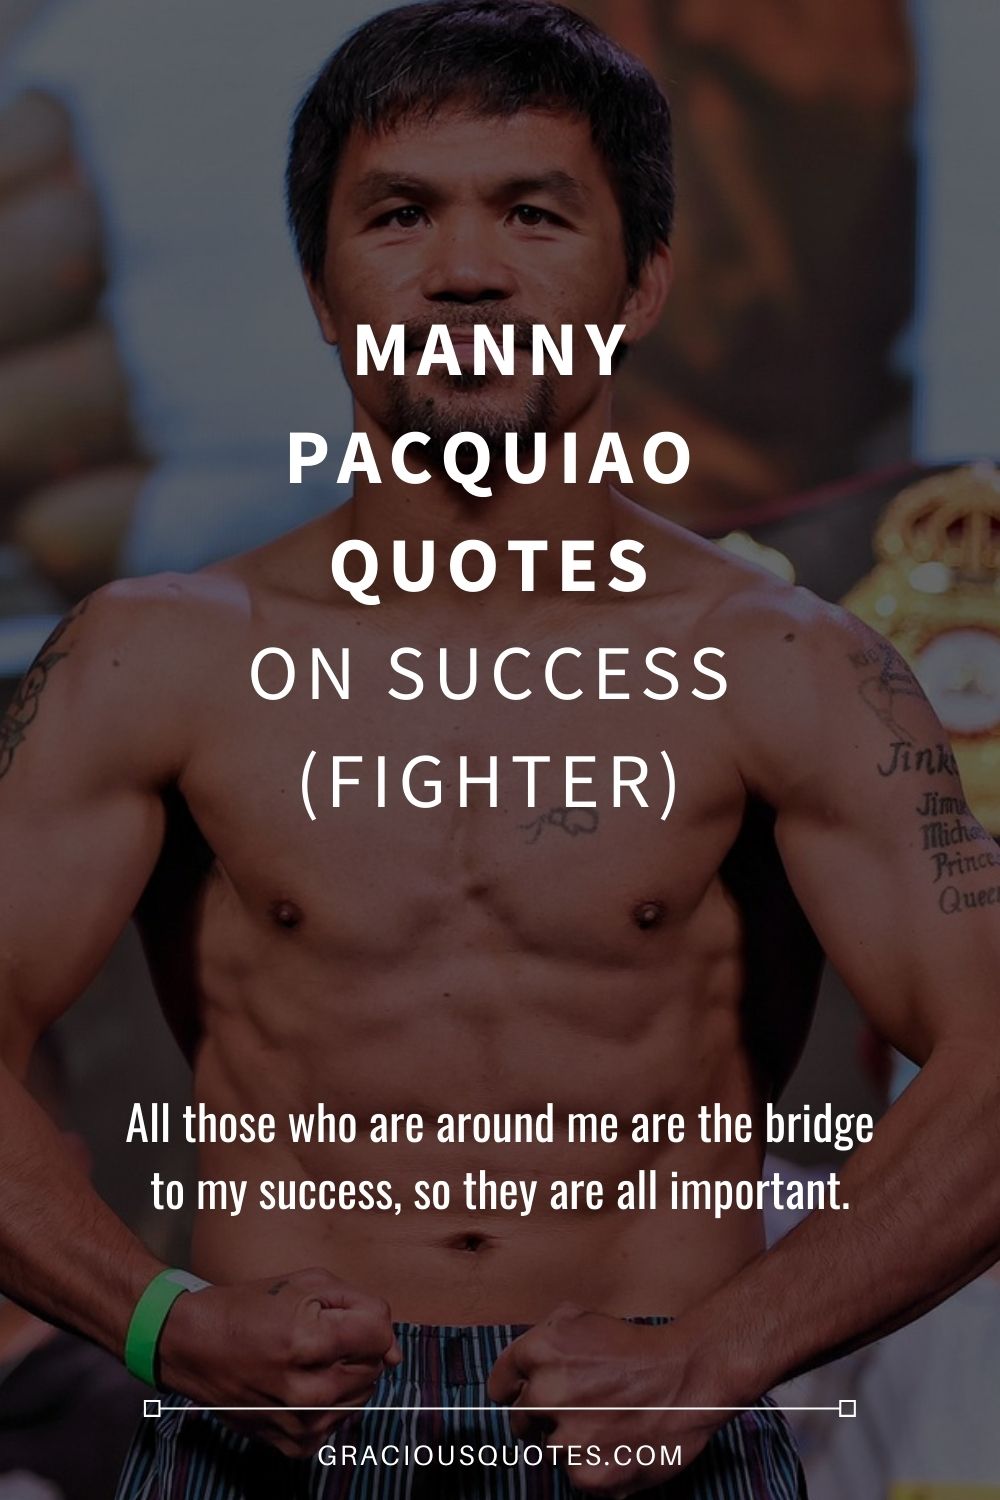 Manny Pacquiao Quotes on Success (FIGHTER) - Gracious Quotes